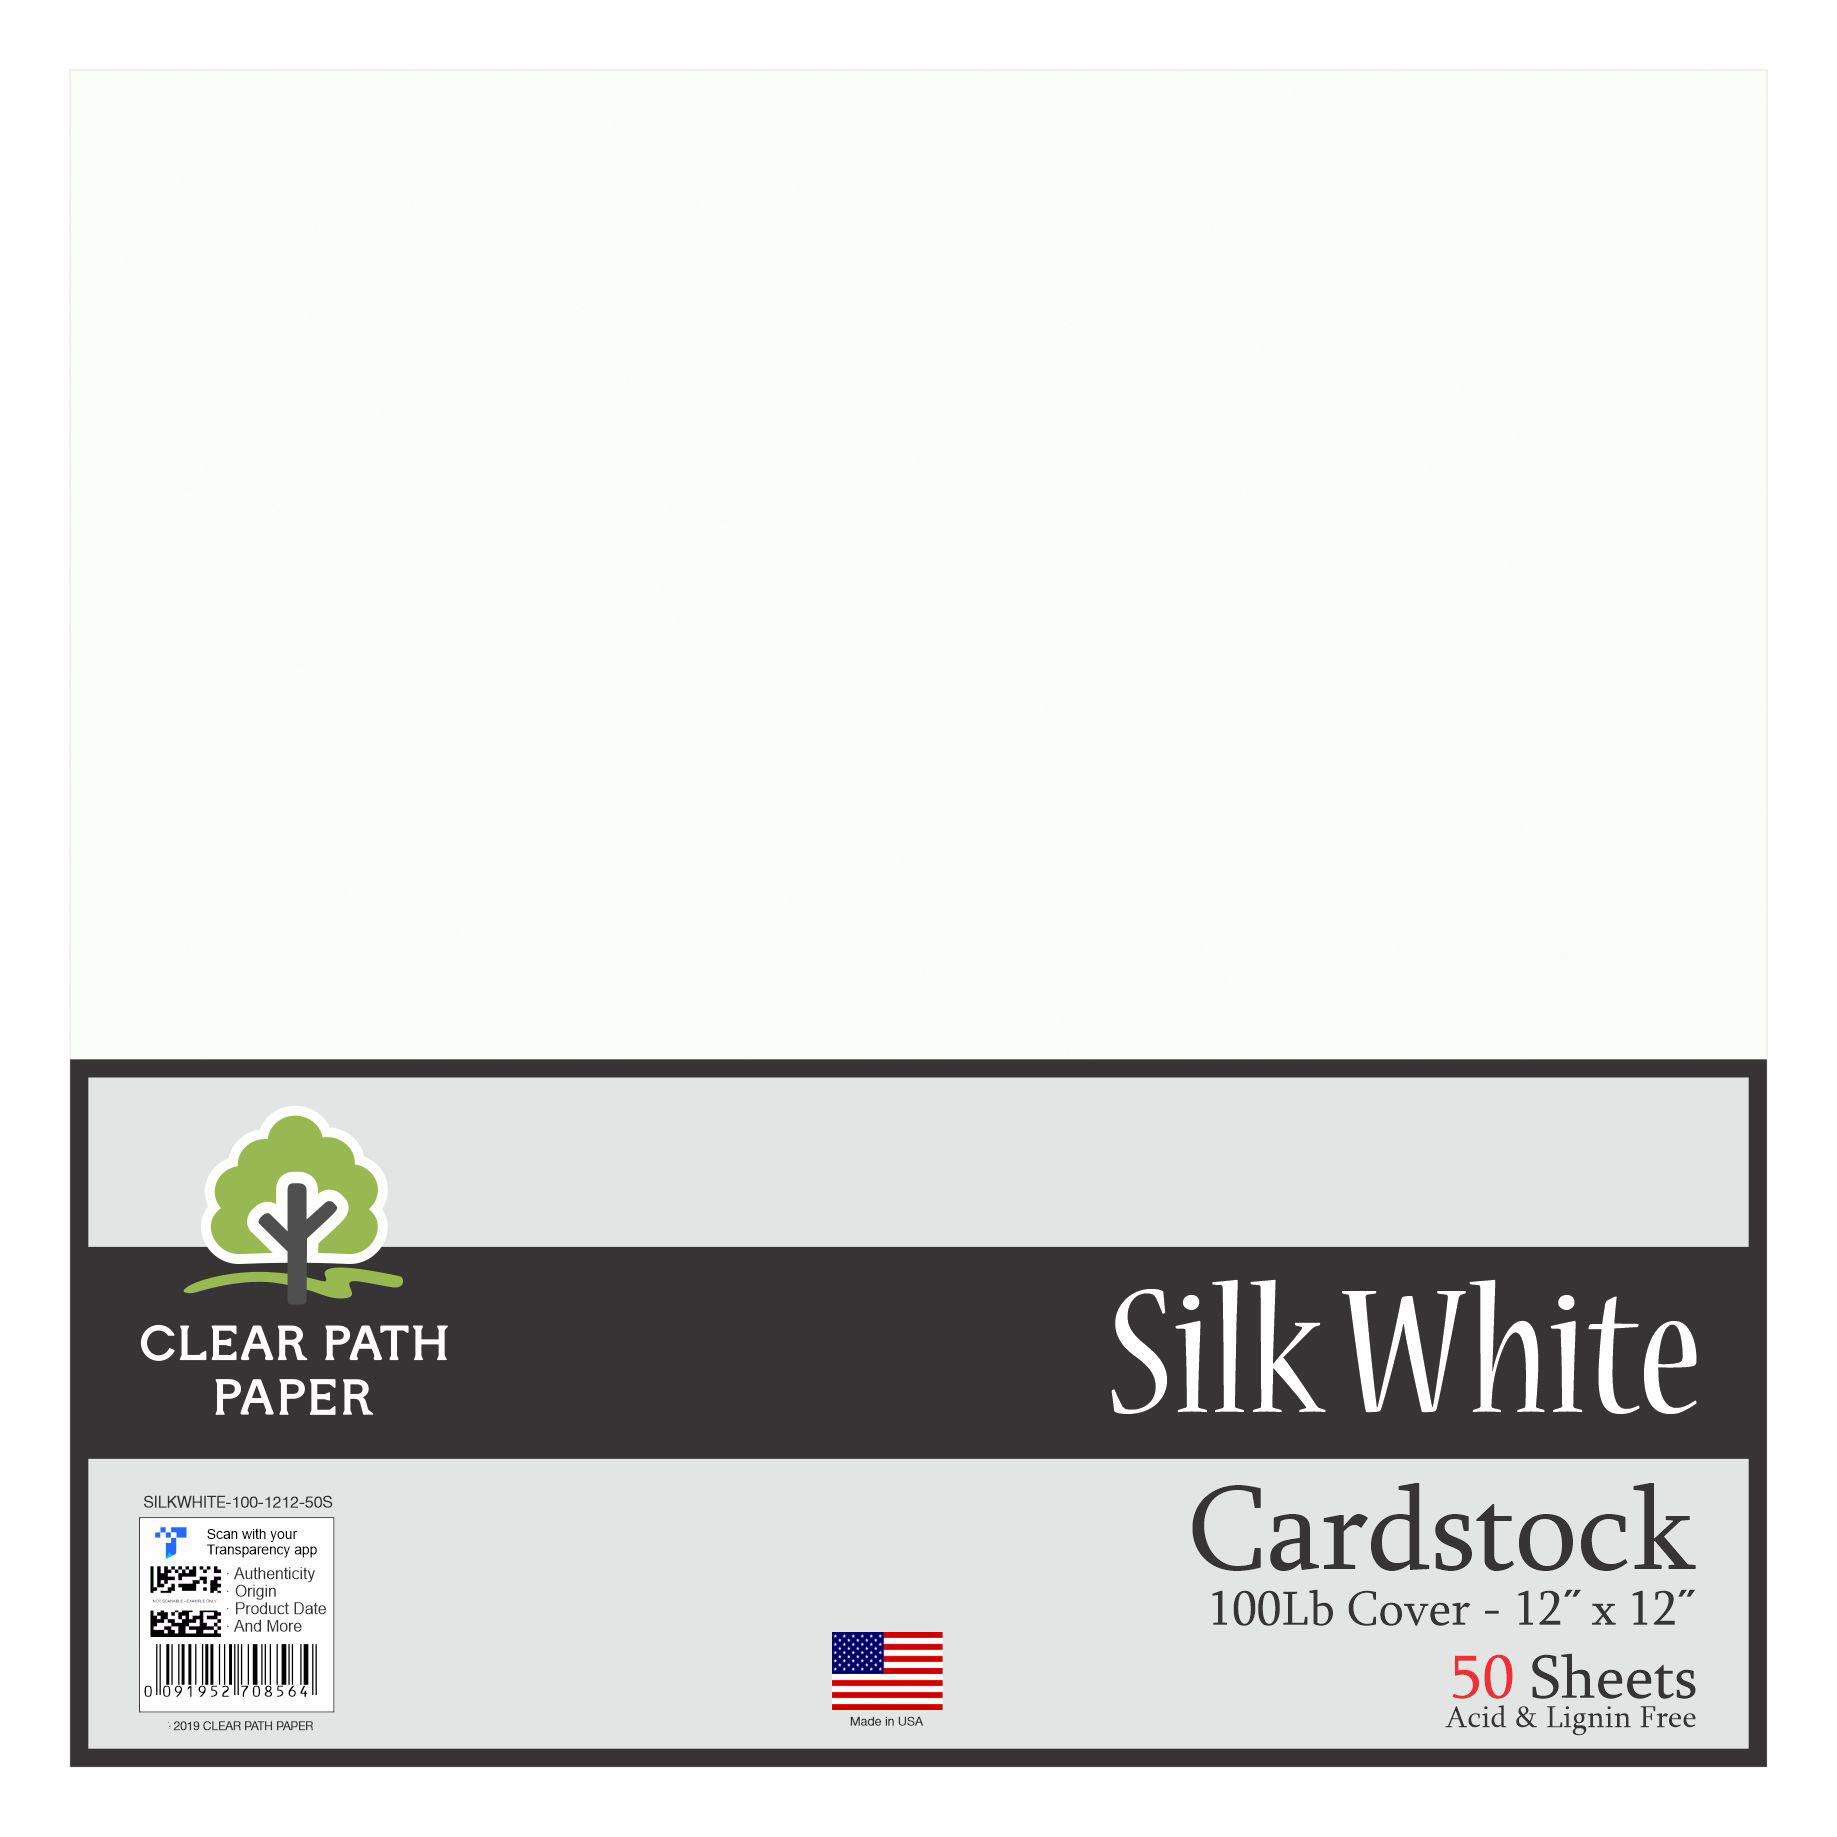 Silk White Cardstock - 12 x 12 inch - 100Lb Cover - 50 Sheets - Clear Path  Paper